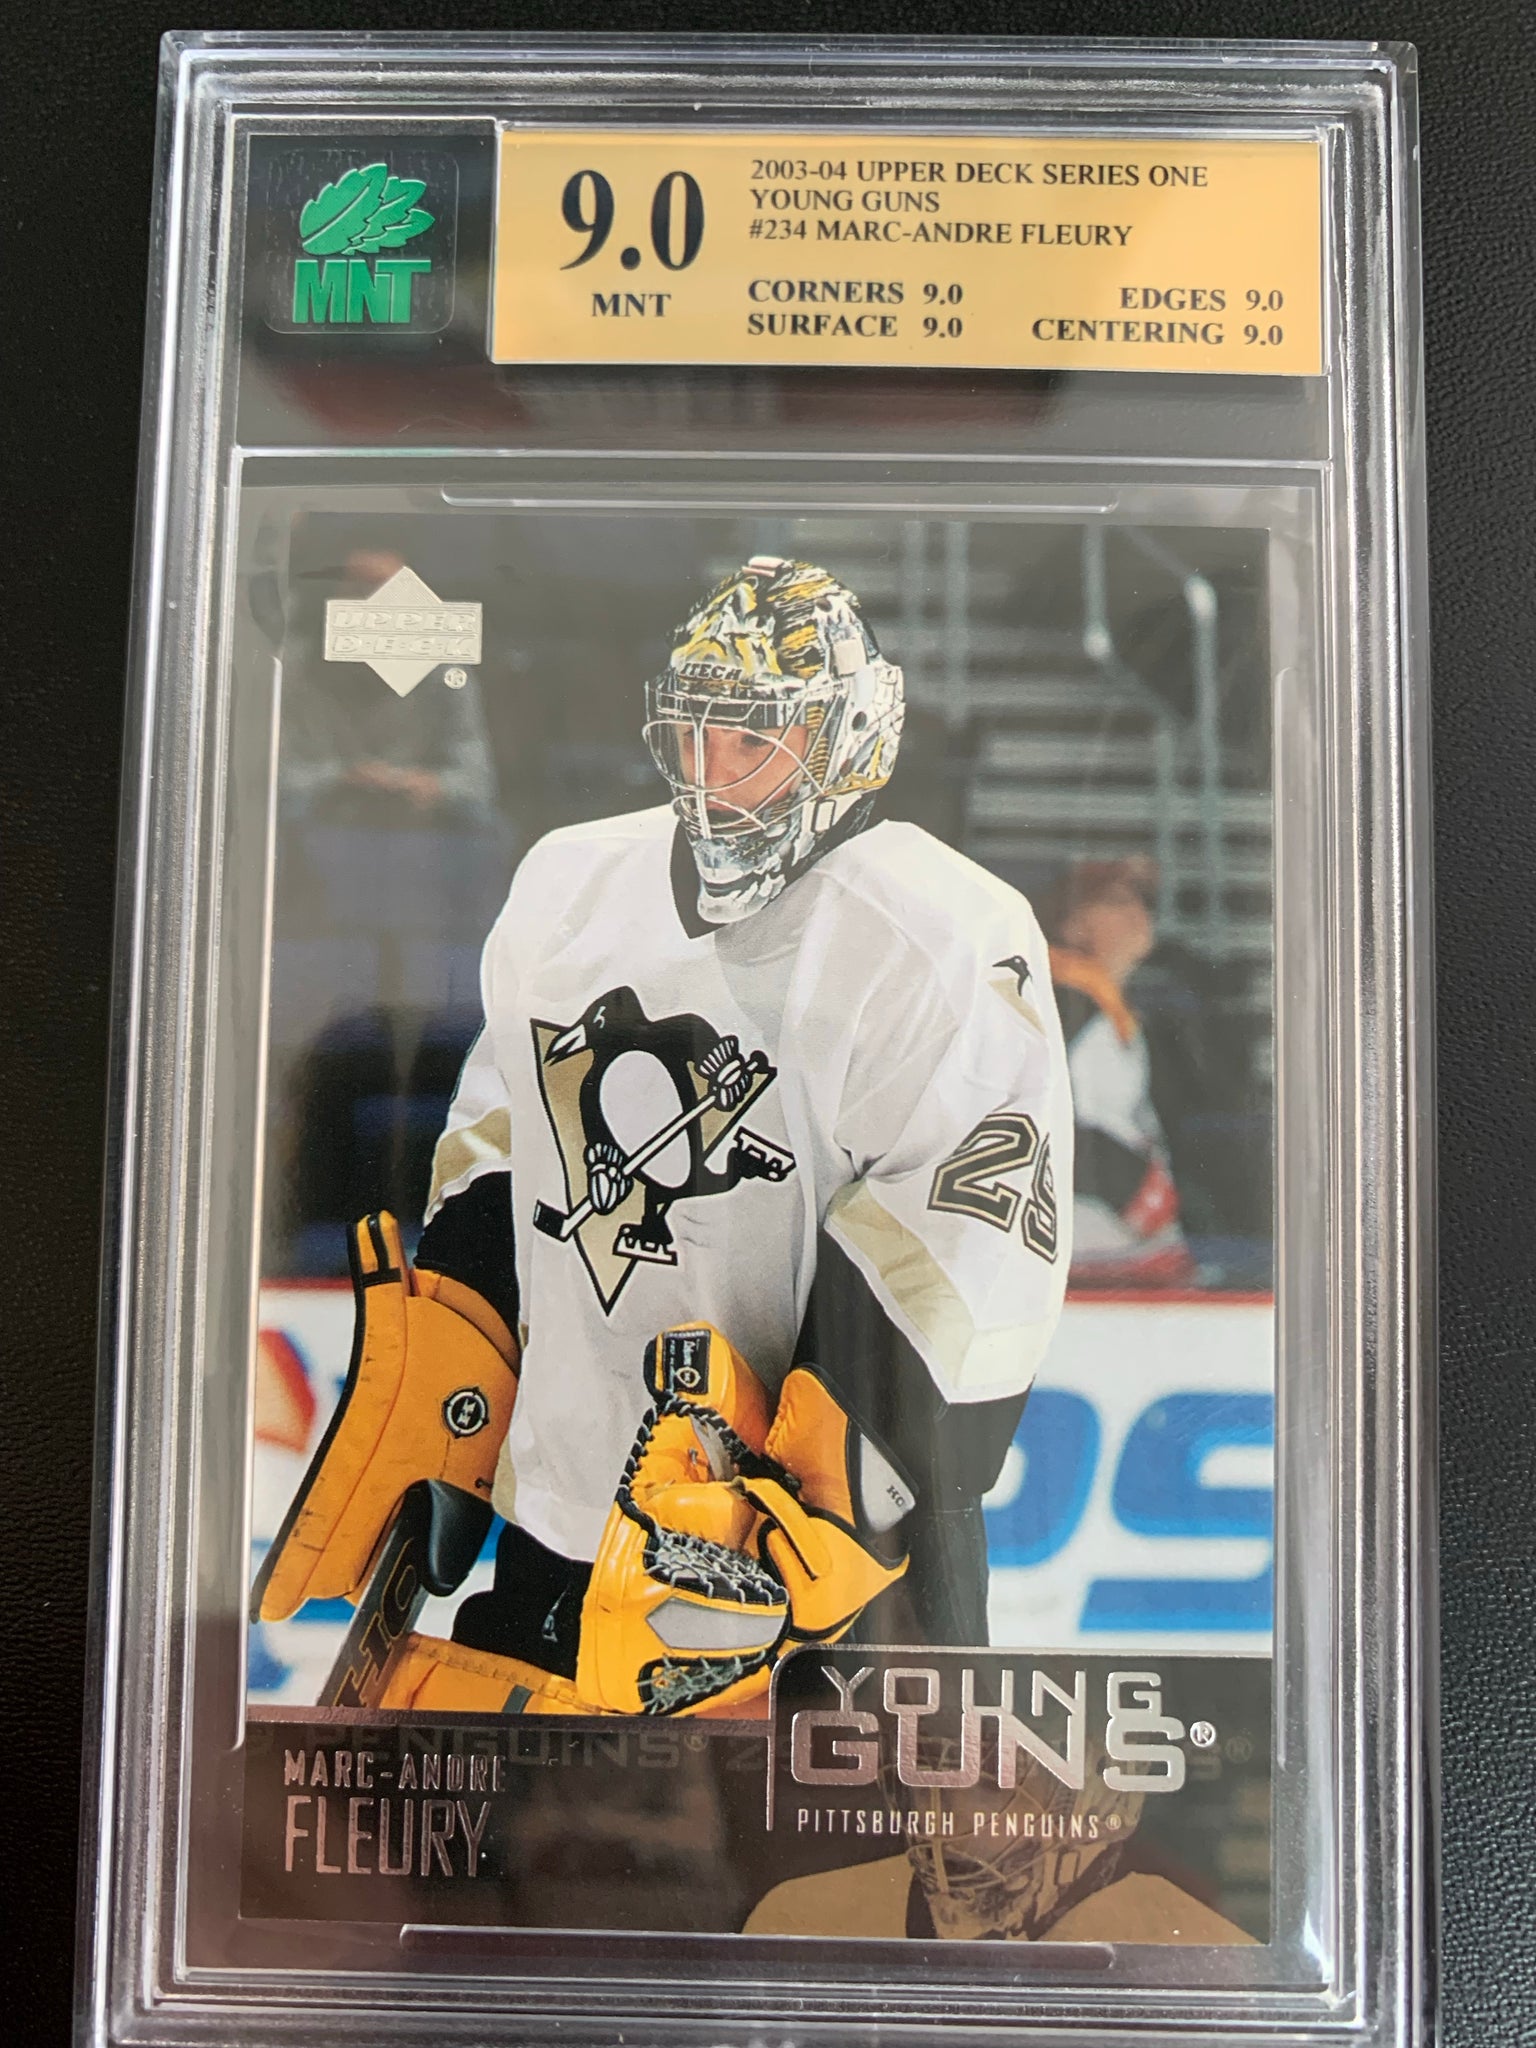 2003 04 Upper Deck Hockey 234 Pittsburgh Penguins Marc Andre Fleury Mint Sports Cards Collectibles